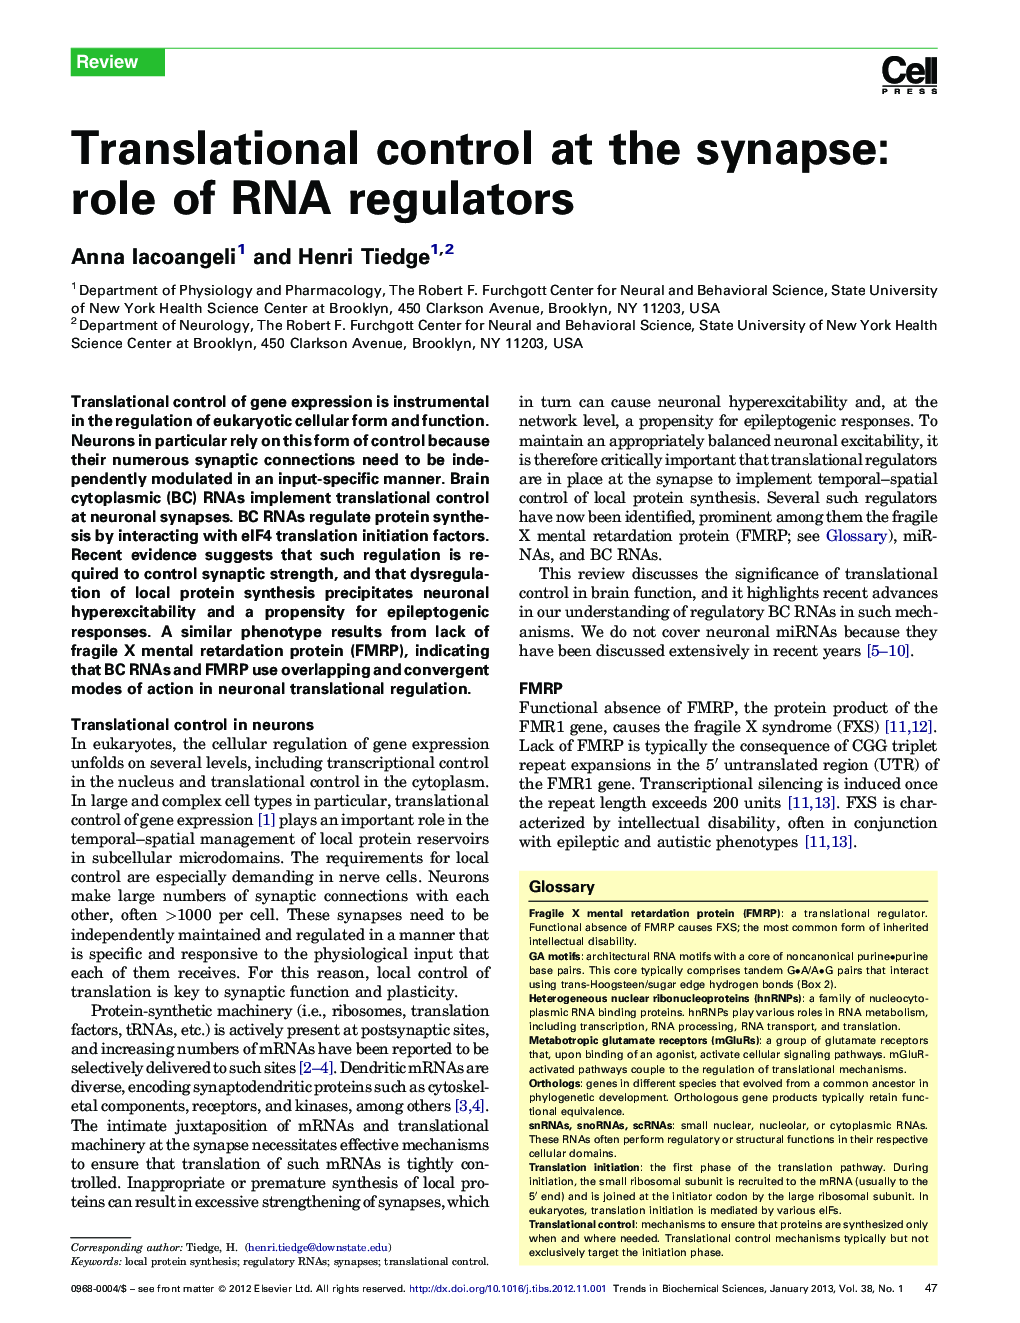 Translational control at the synapse: role of RNA regulators